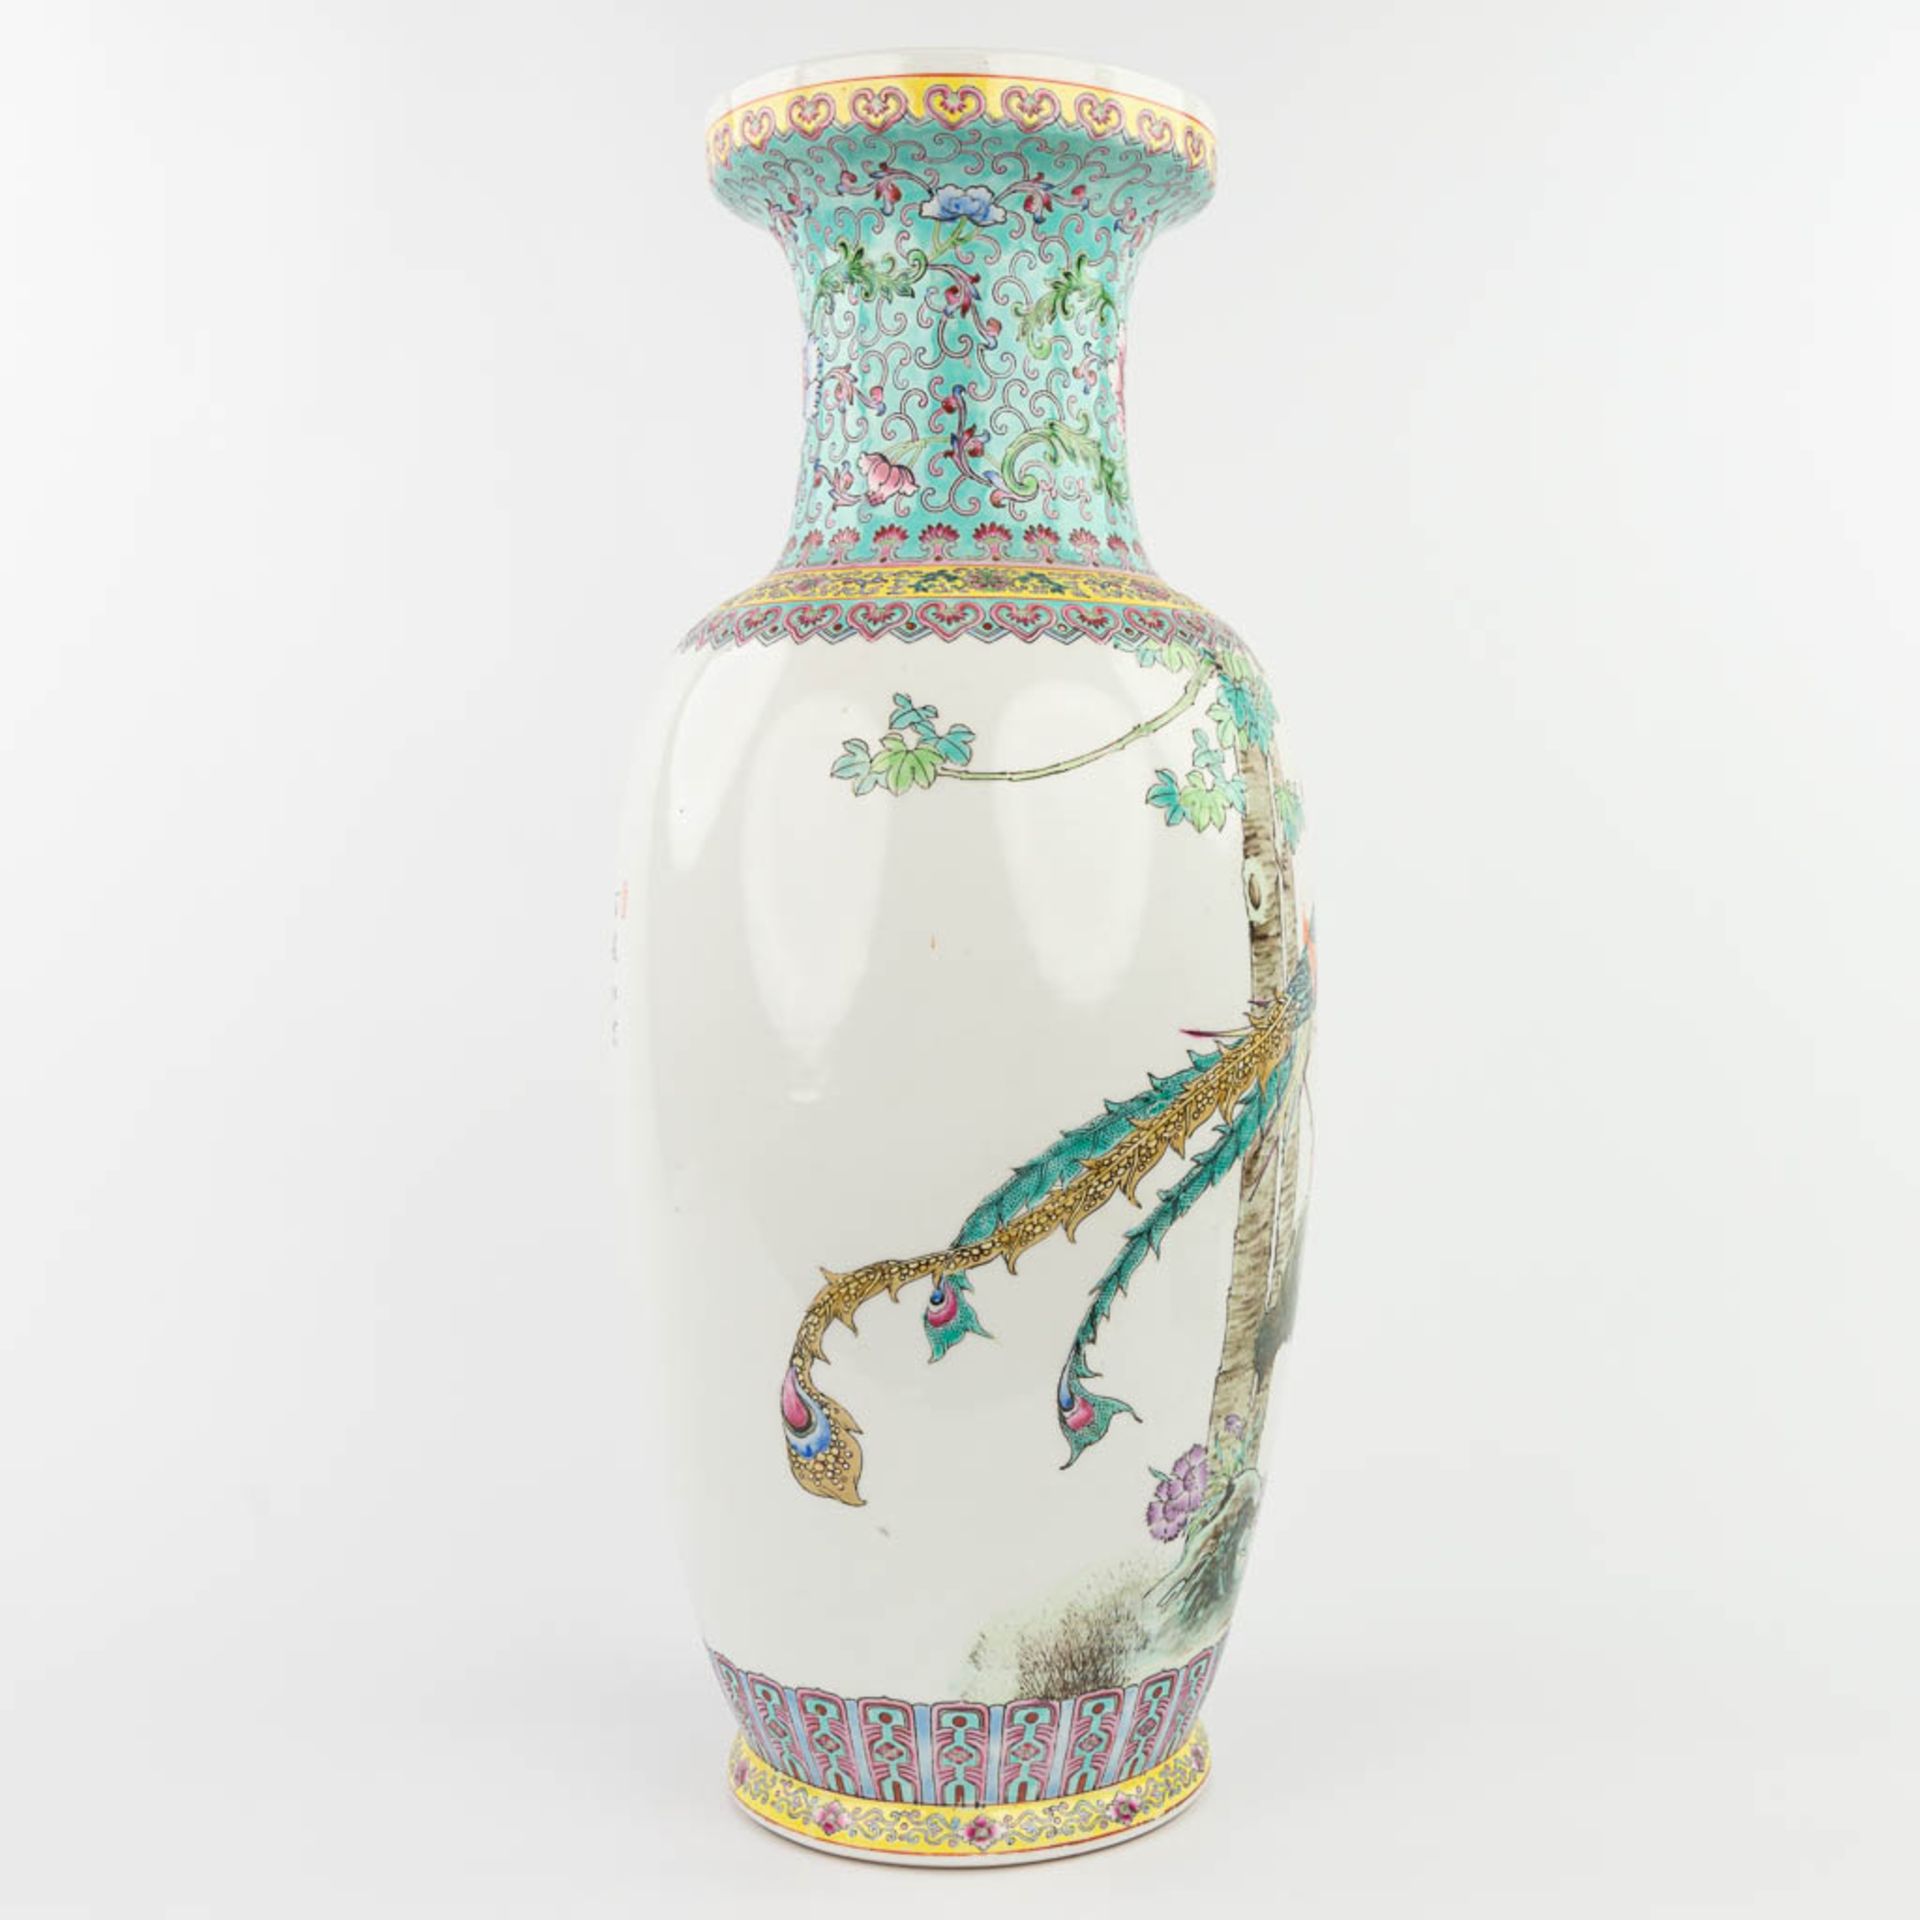 A Chinese vase made of porcelain and decorated with peacocks. 20th C. (60,5 x 23,5 cm) - Image 10 of 12